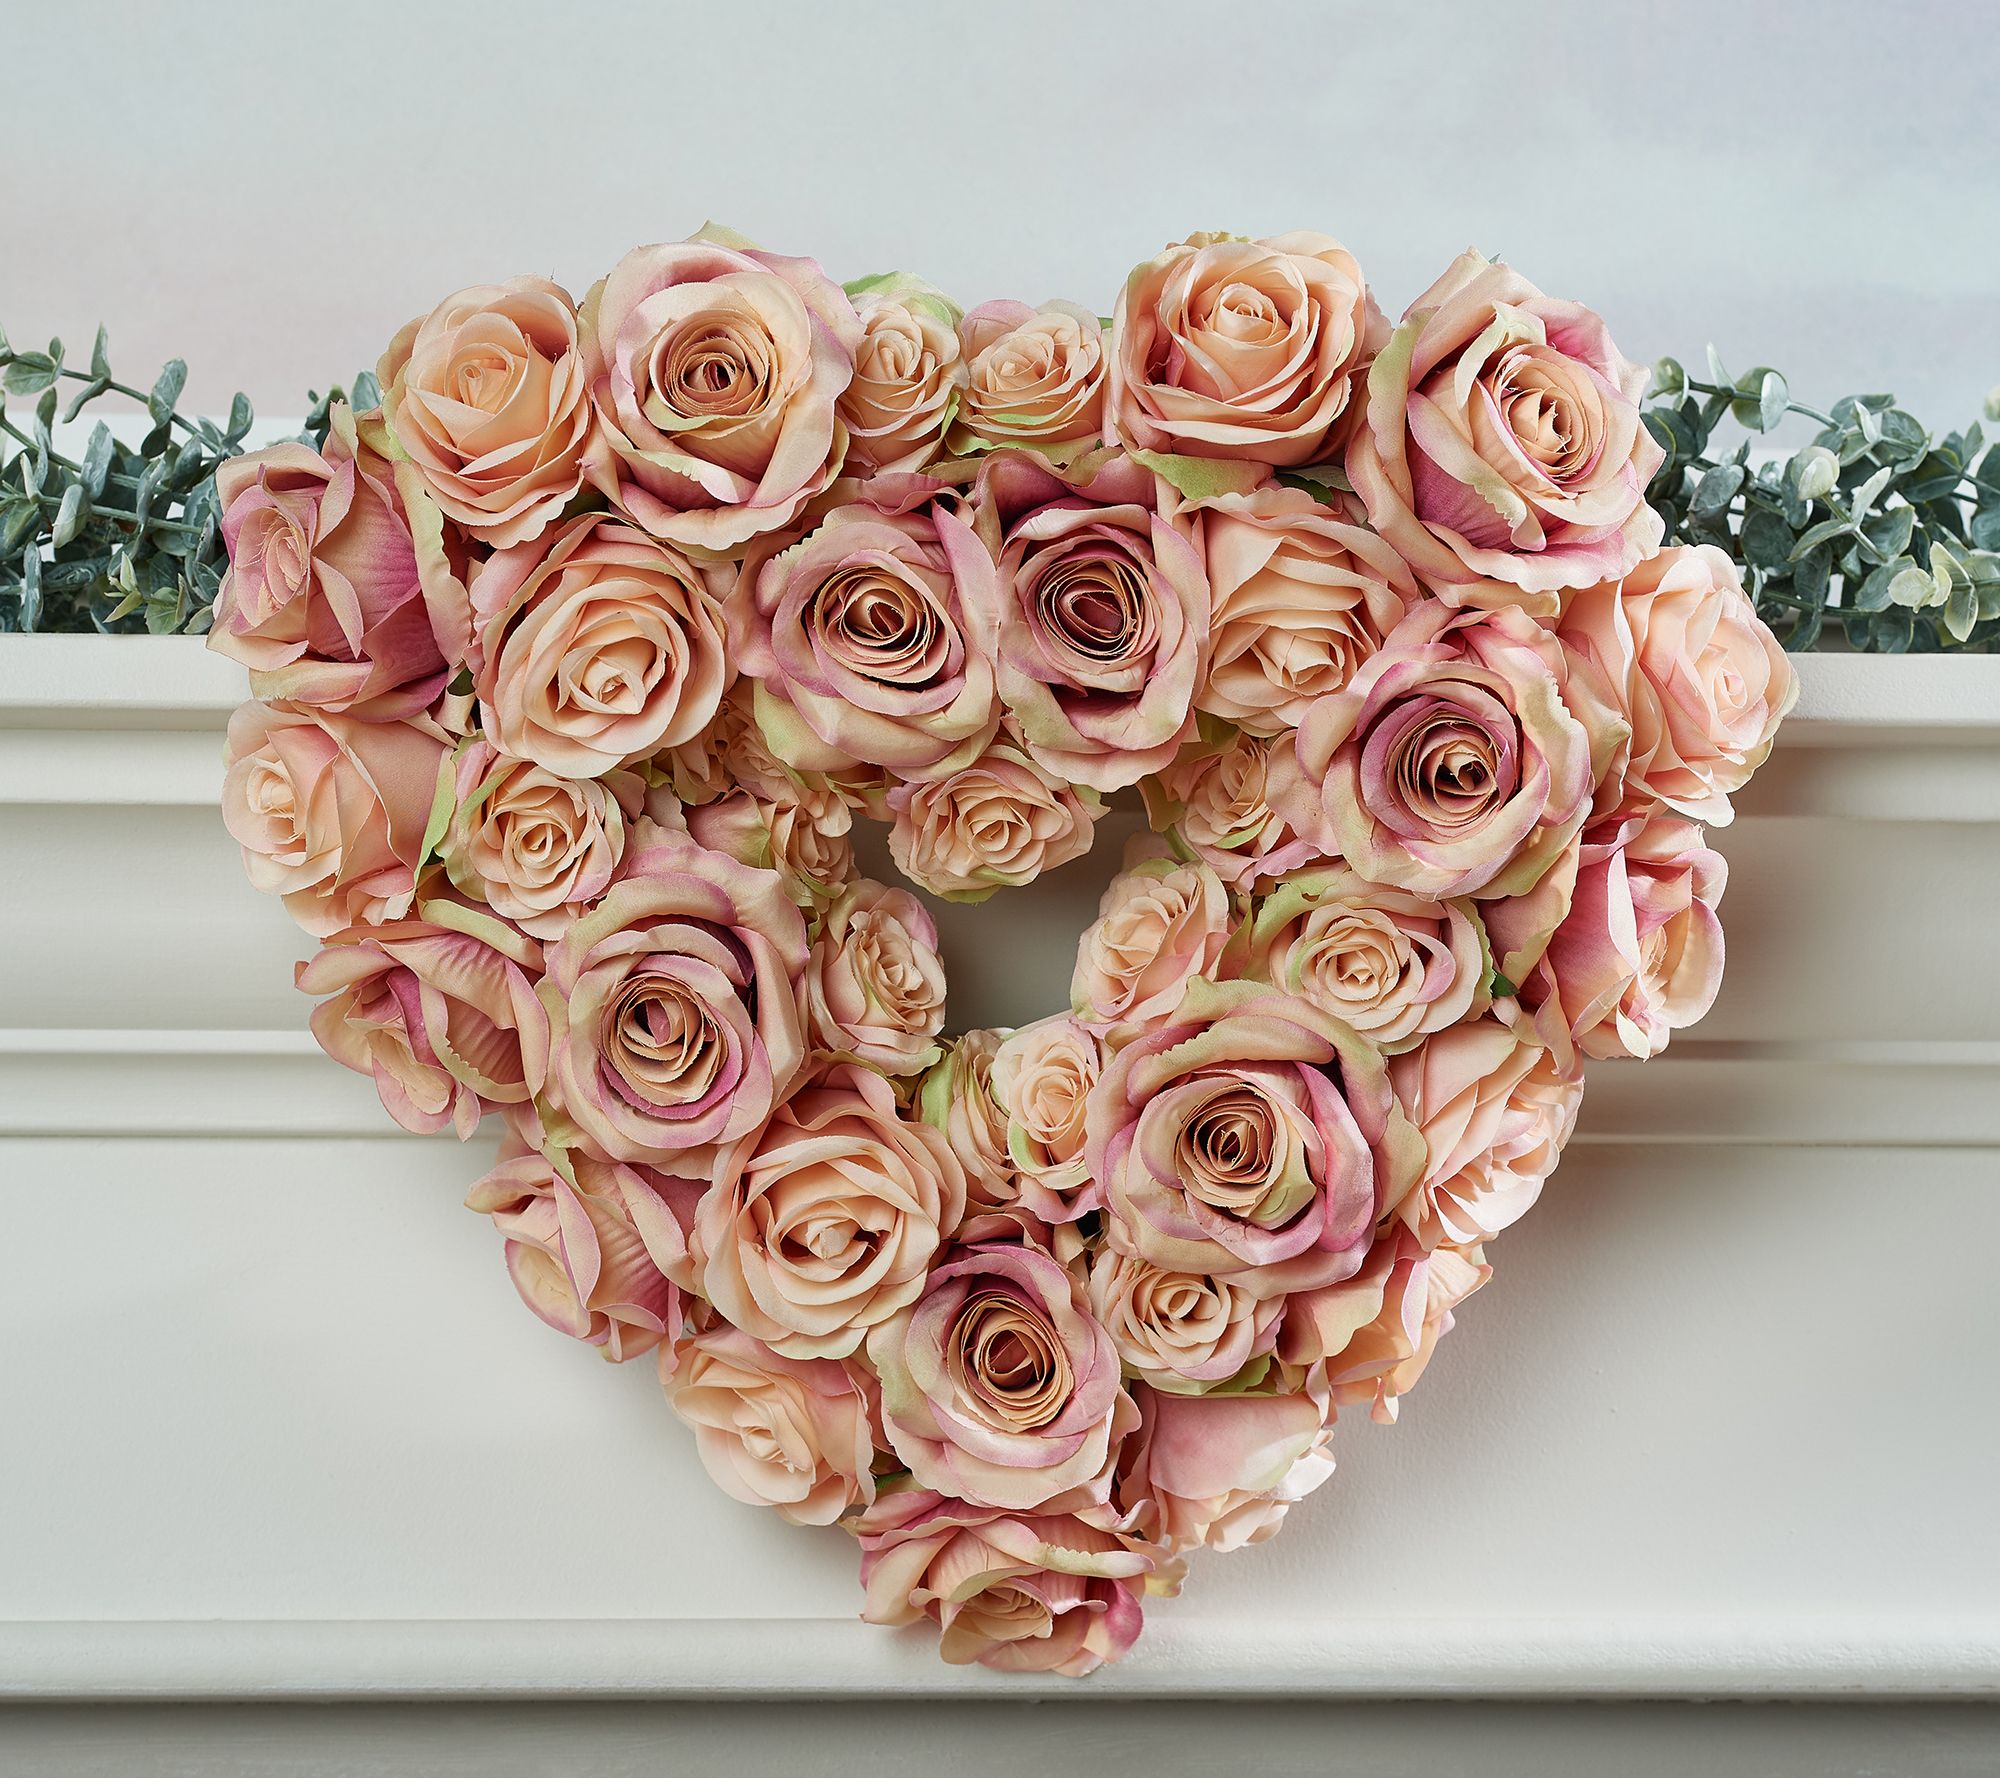 As Is 14 Vintage Rose Heart-Shaped Wreath by Valerie 